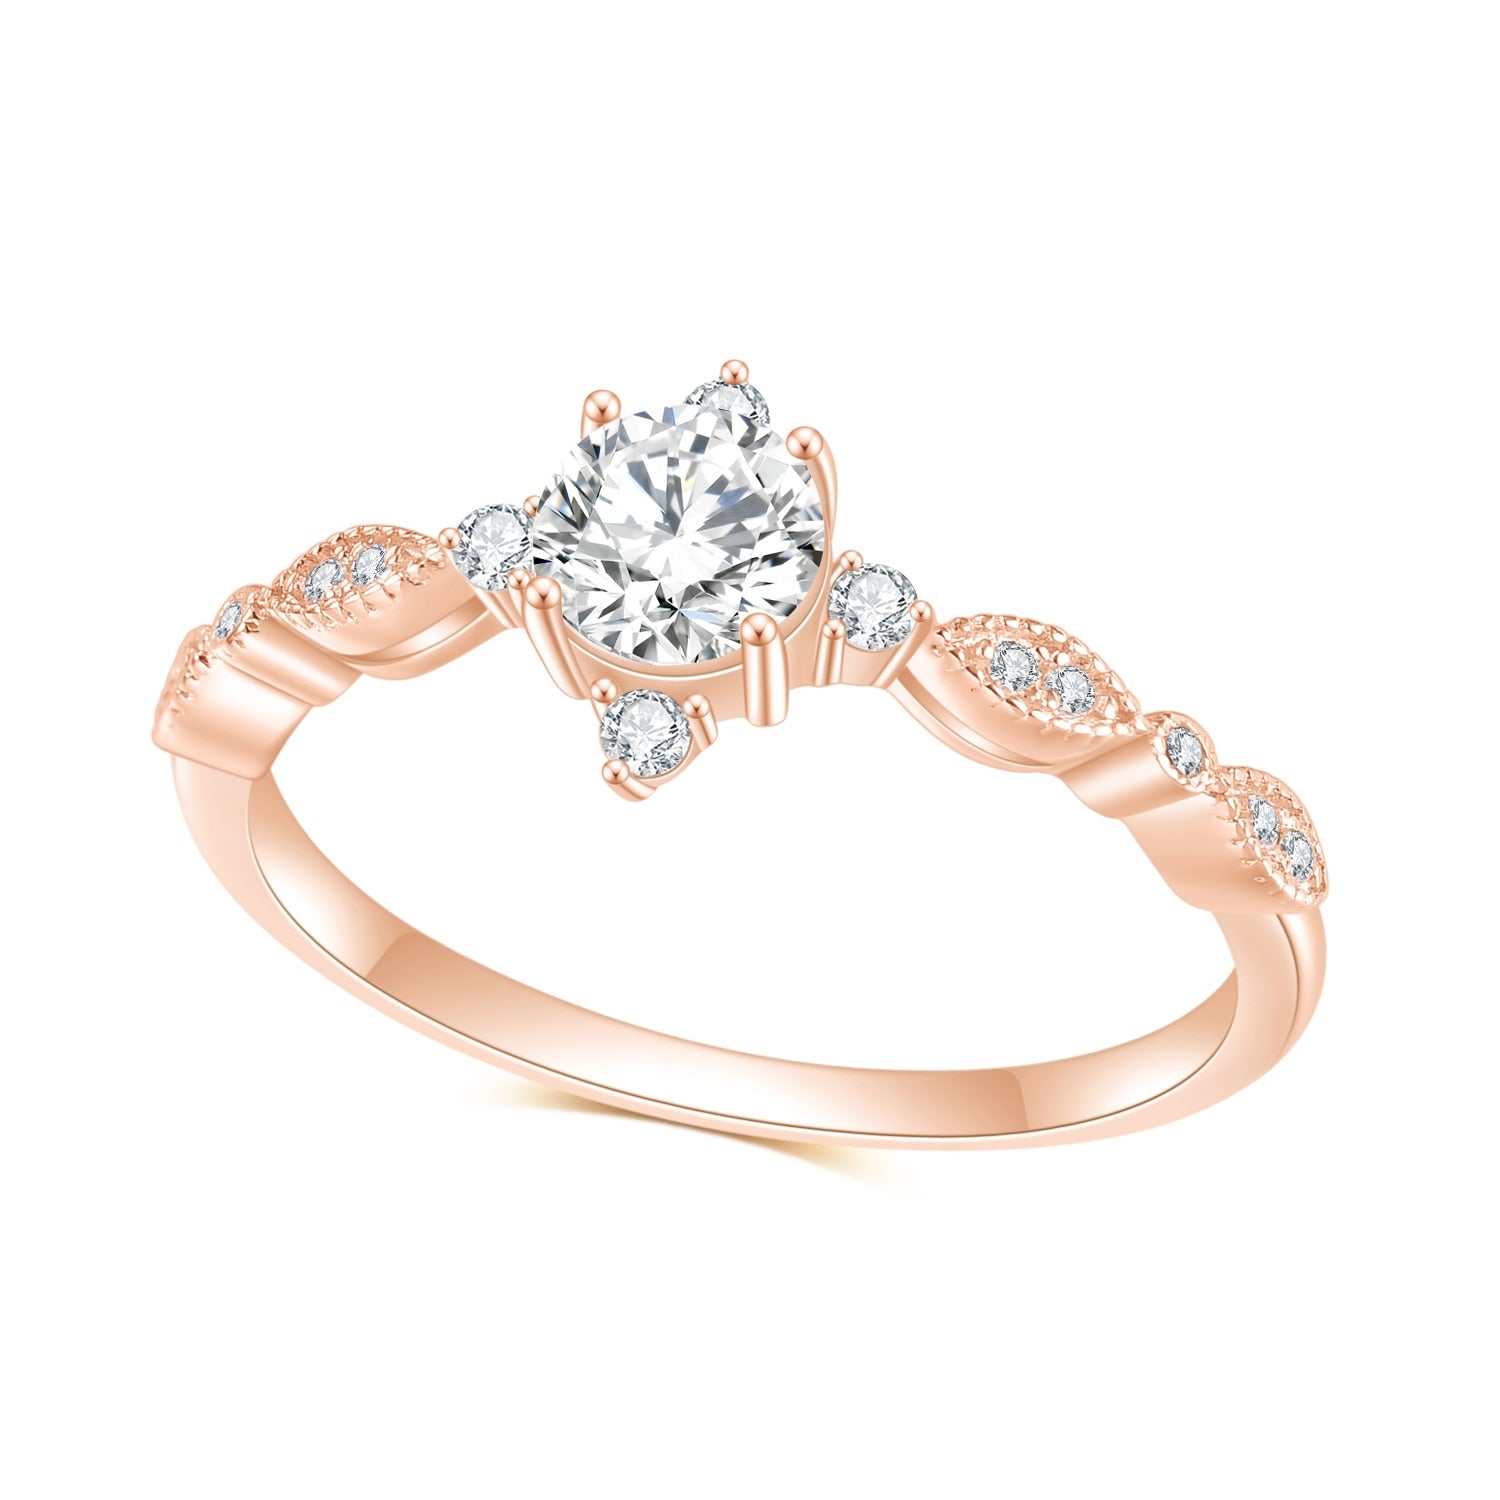 A rose gold vintage inspired engagement ring set with a round moissanite and 4 small zircons on all four sides.